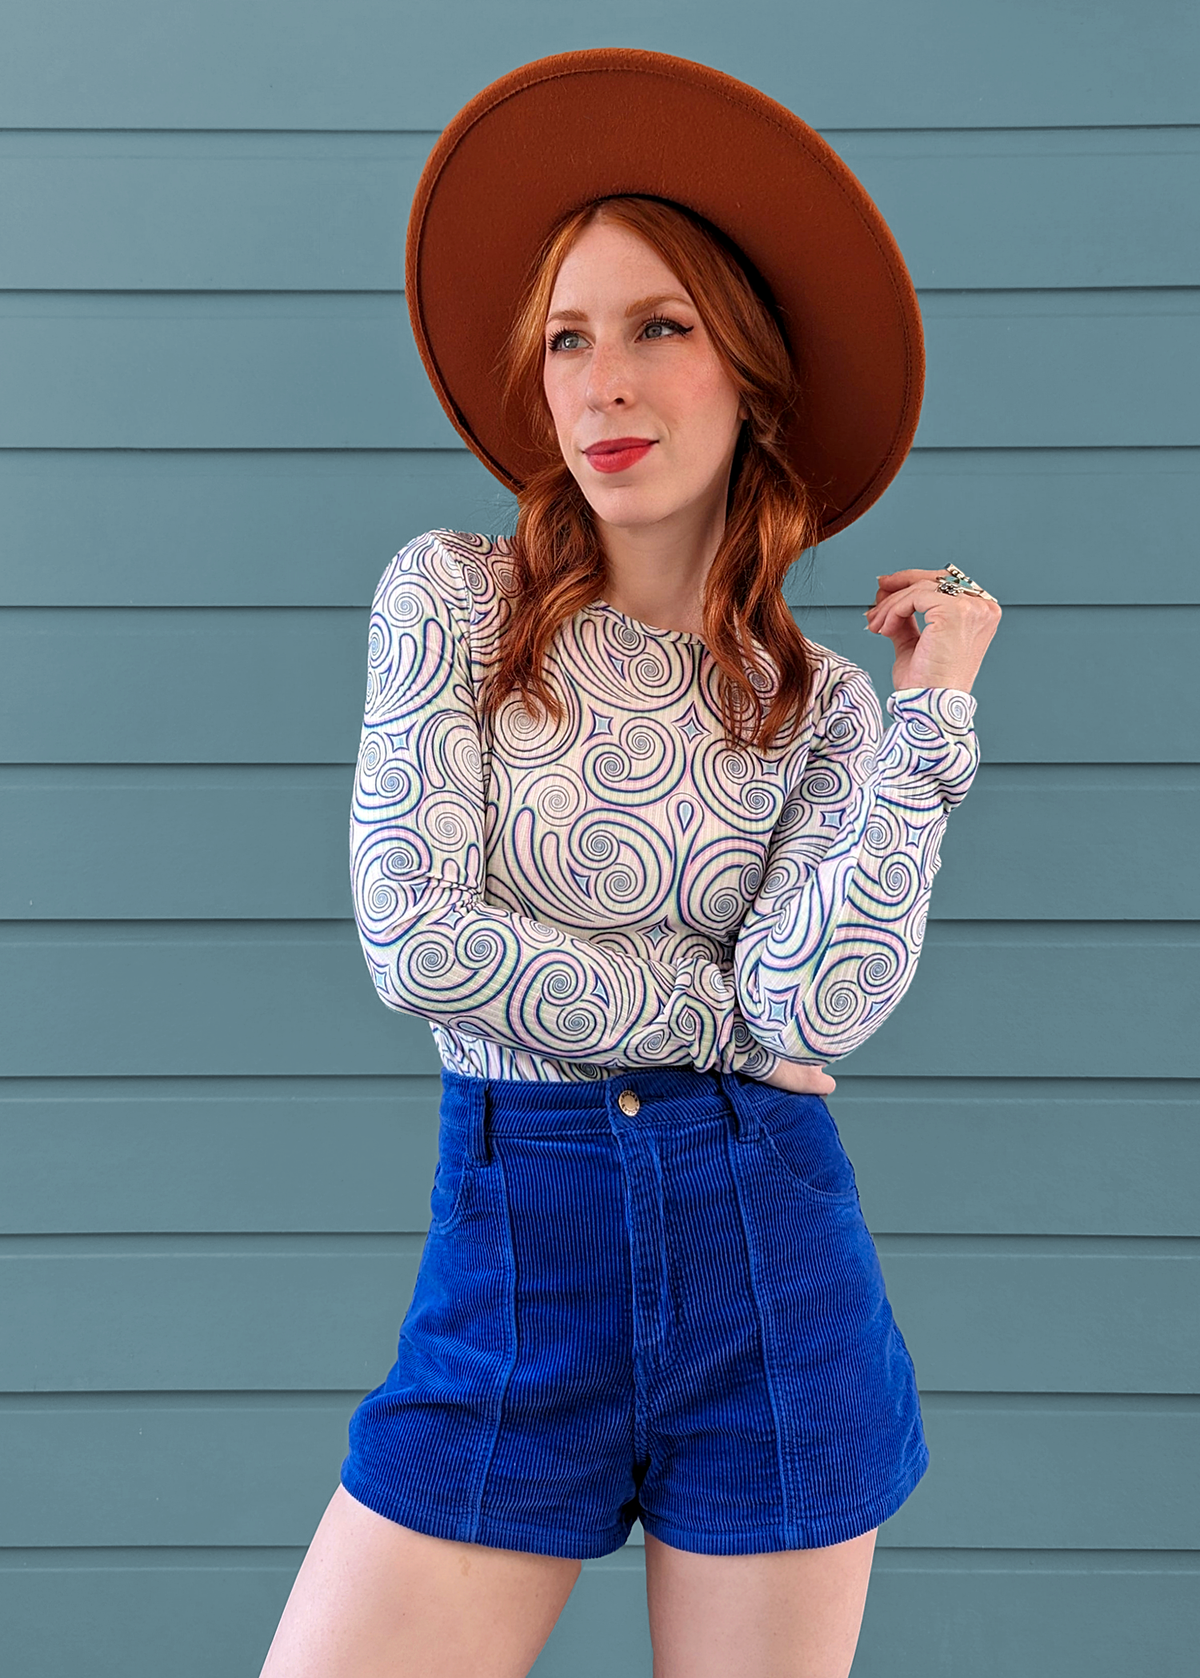 70s inspired electric blue corduroy Dusters shorts with high rise waist by Rolla's Jeans